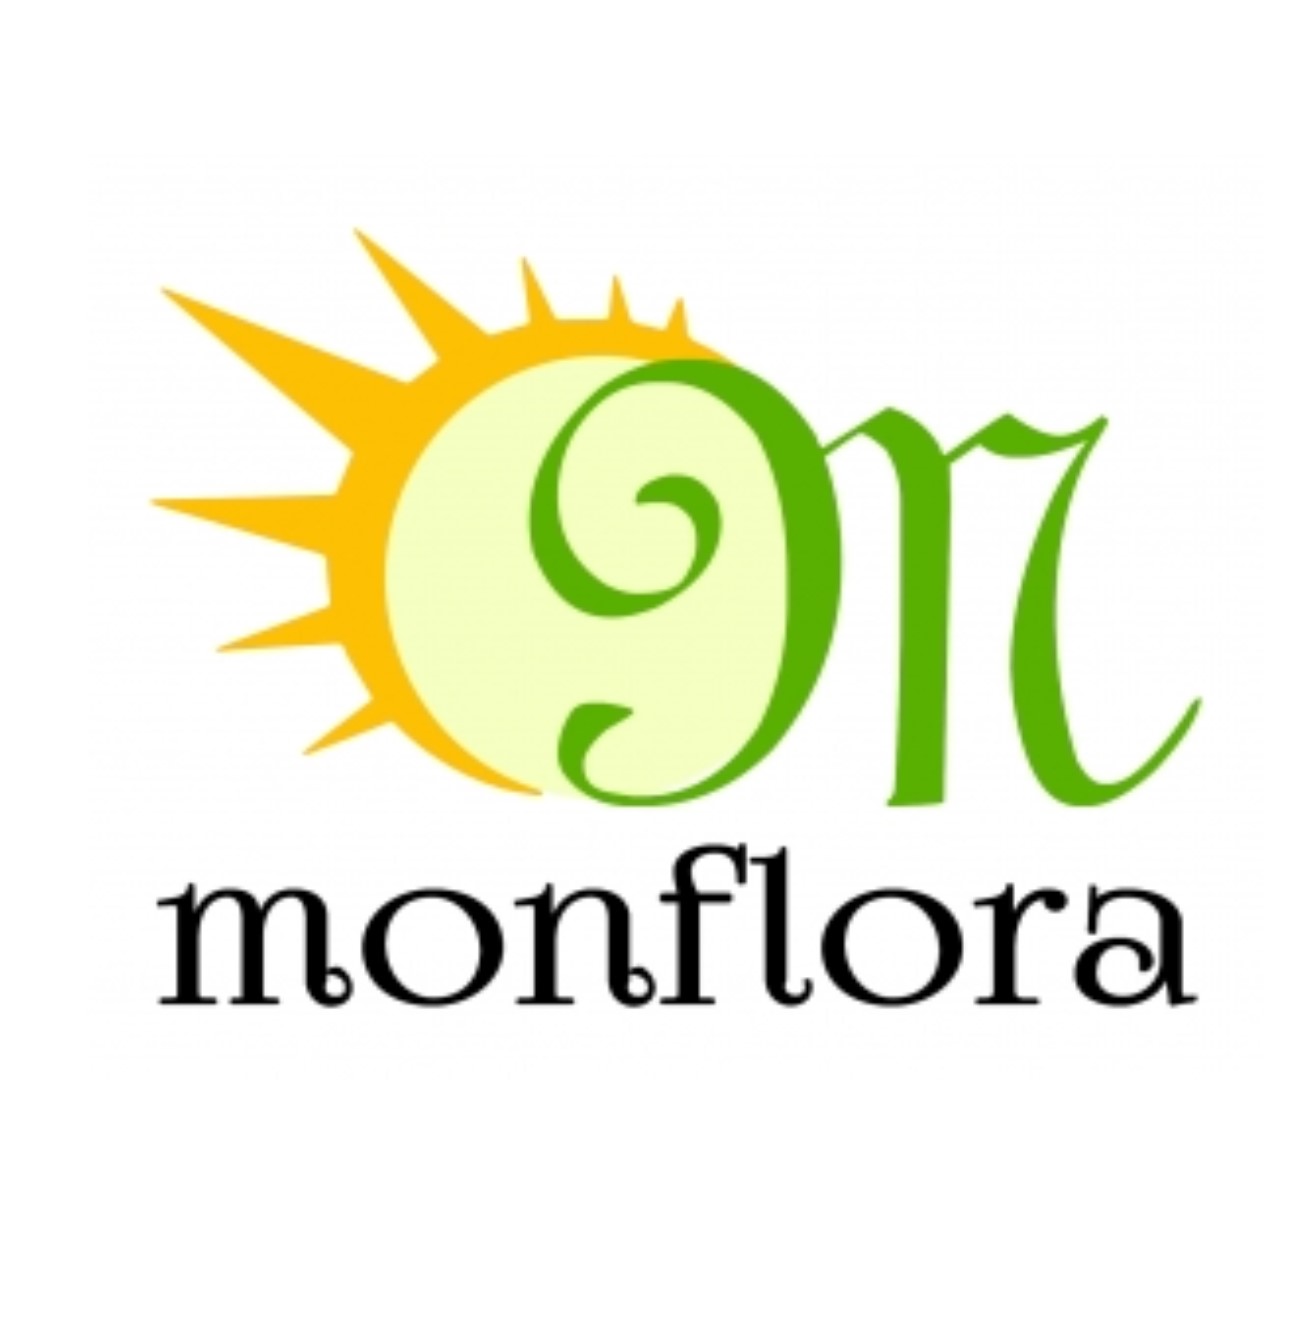 Monflora catering and Hospitality company